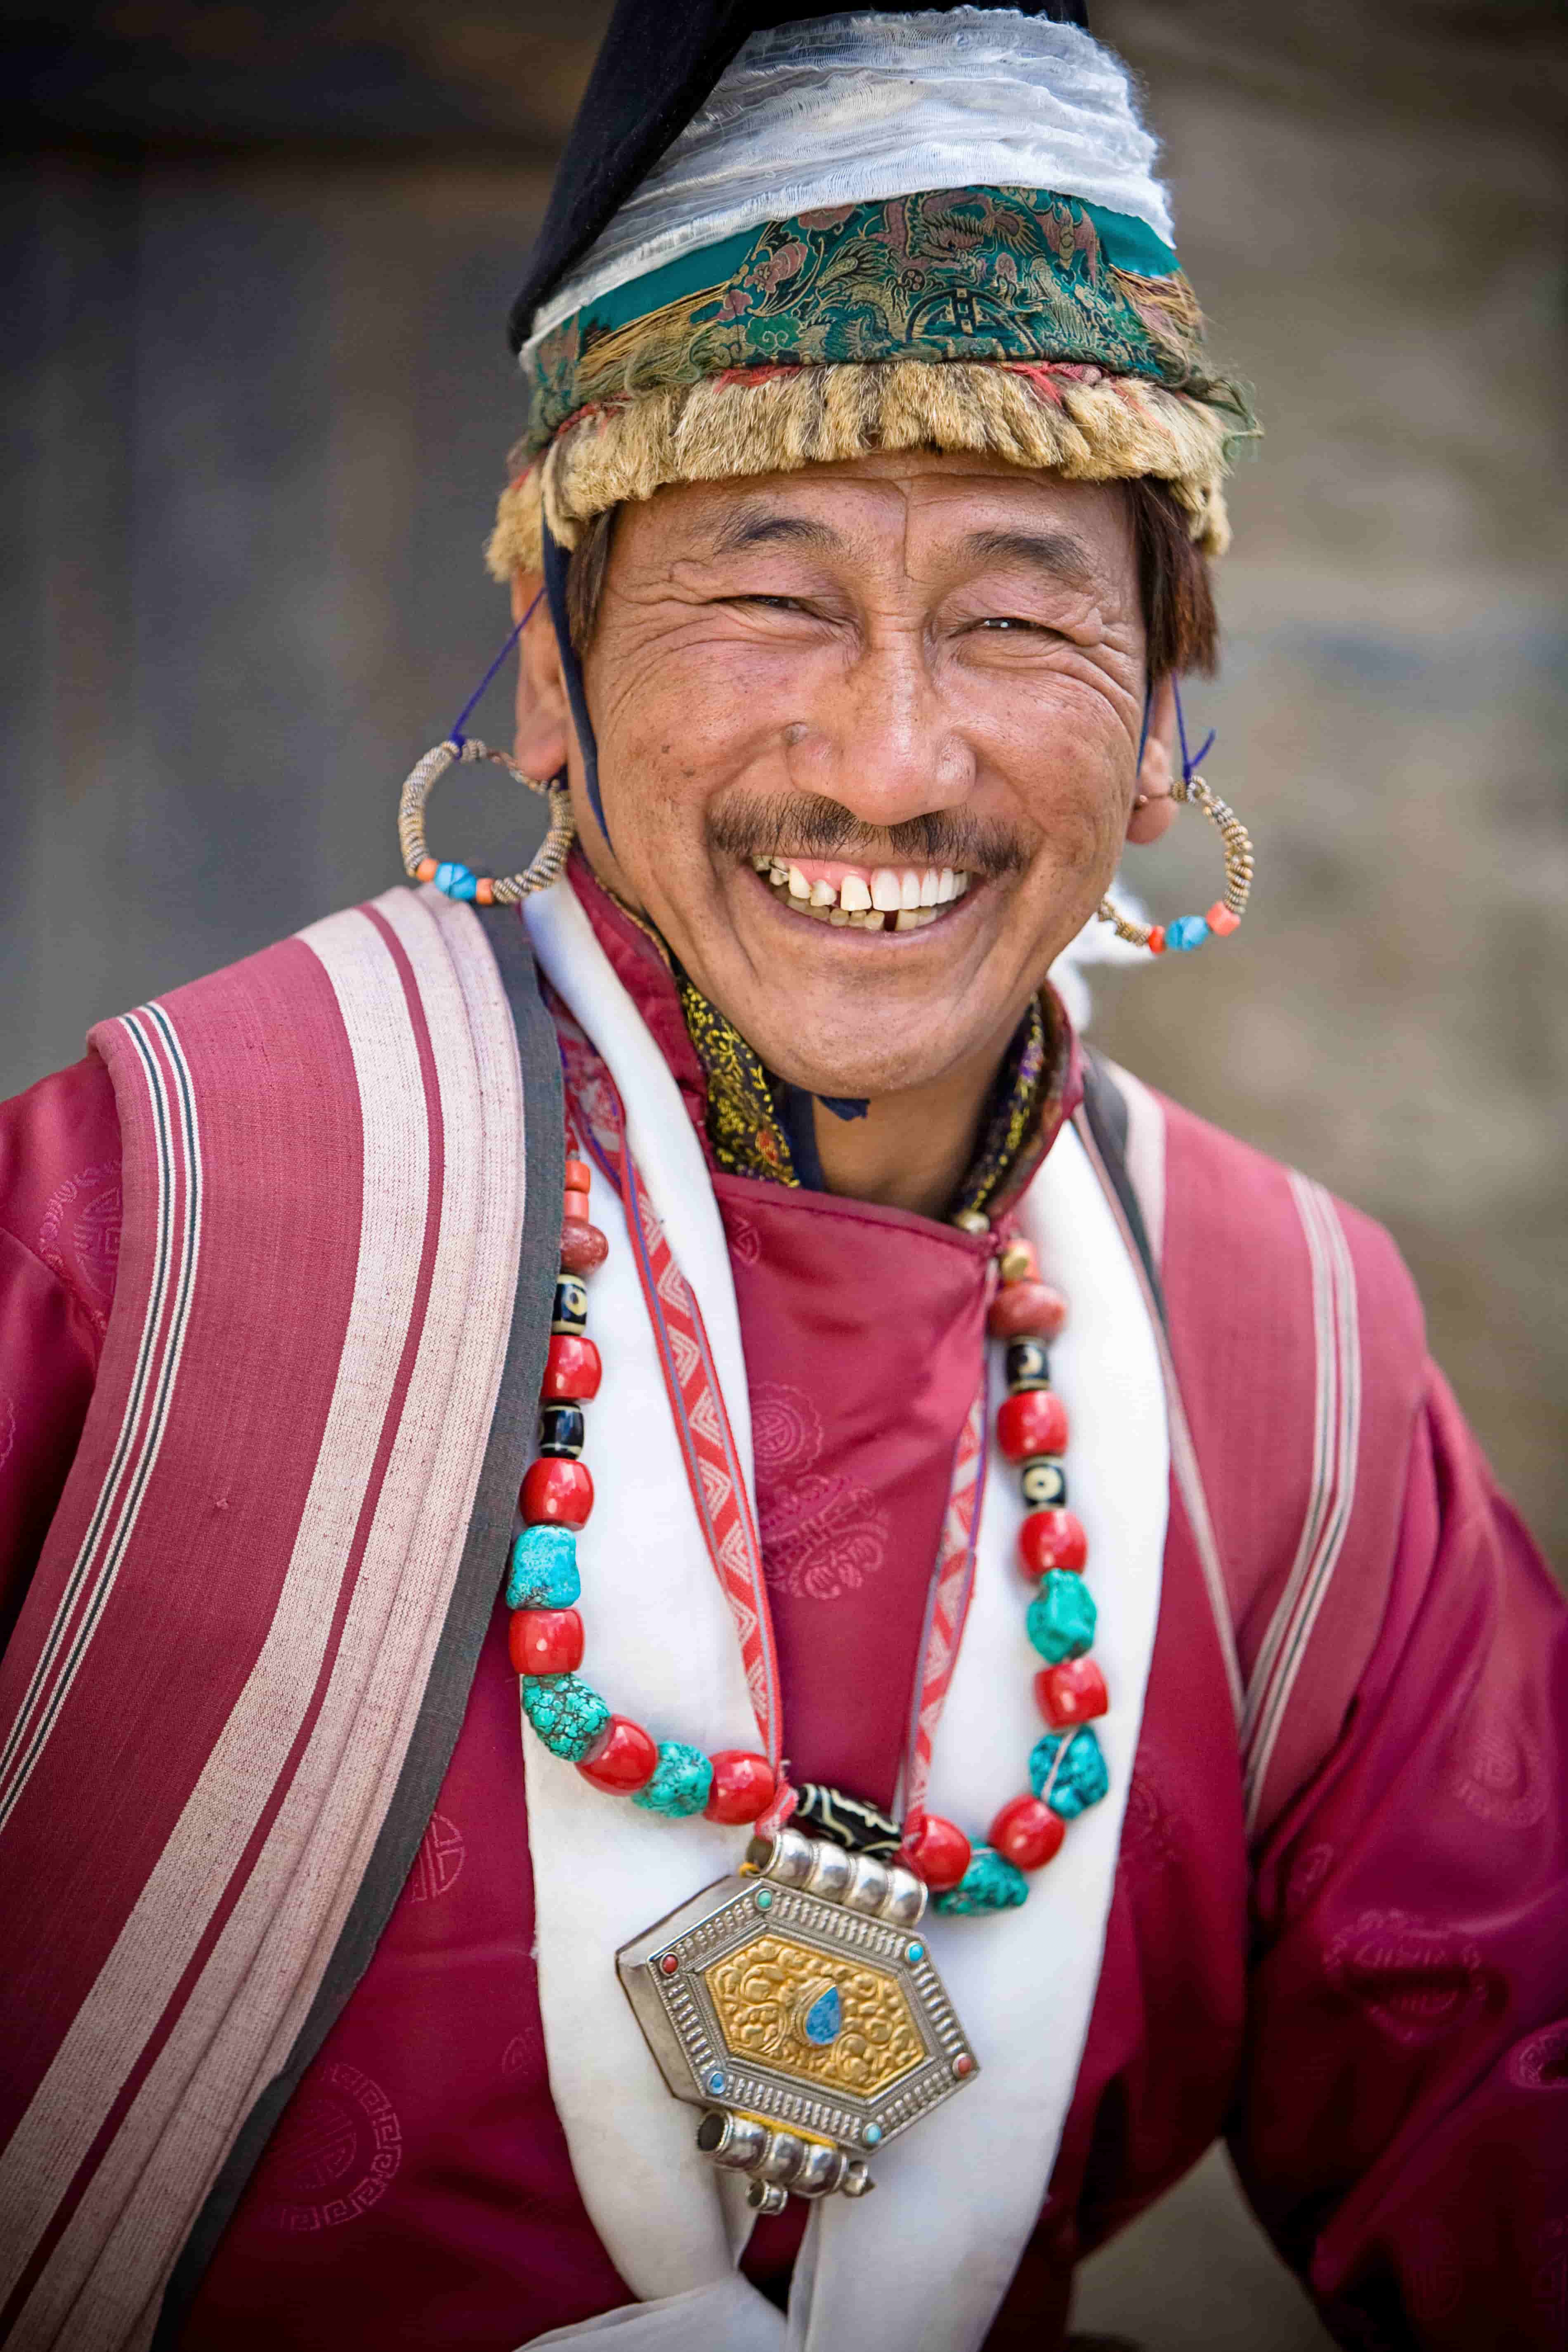 The man in traditional clothing with a smile.